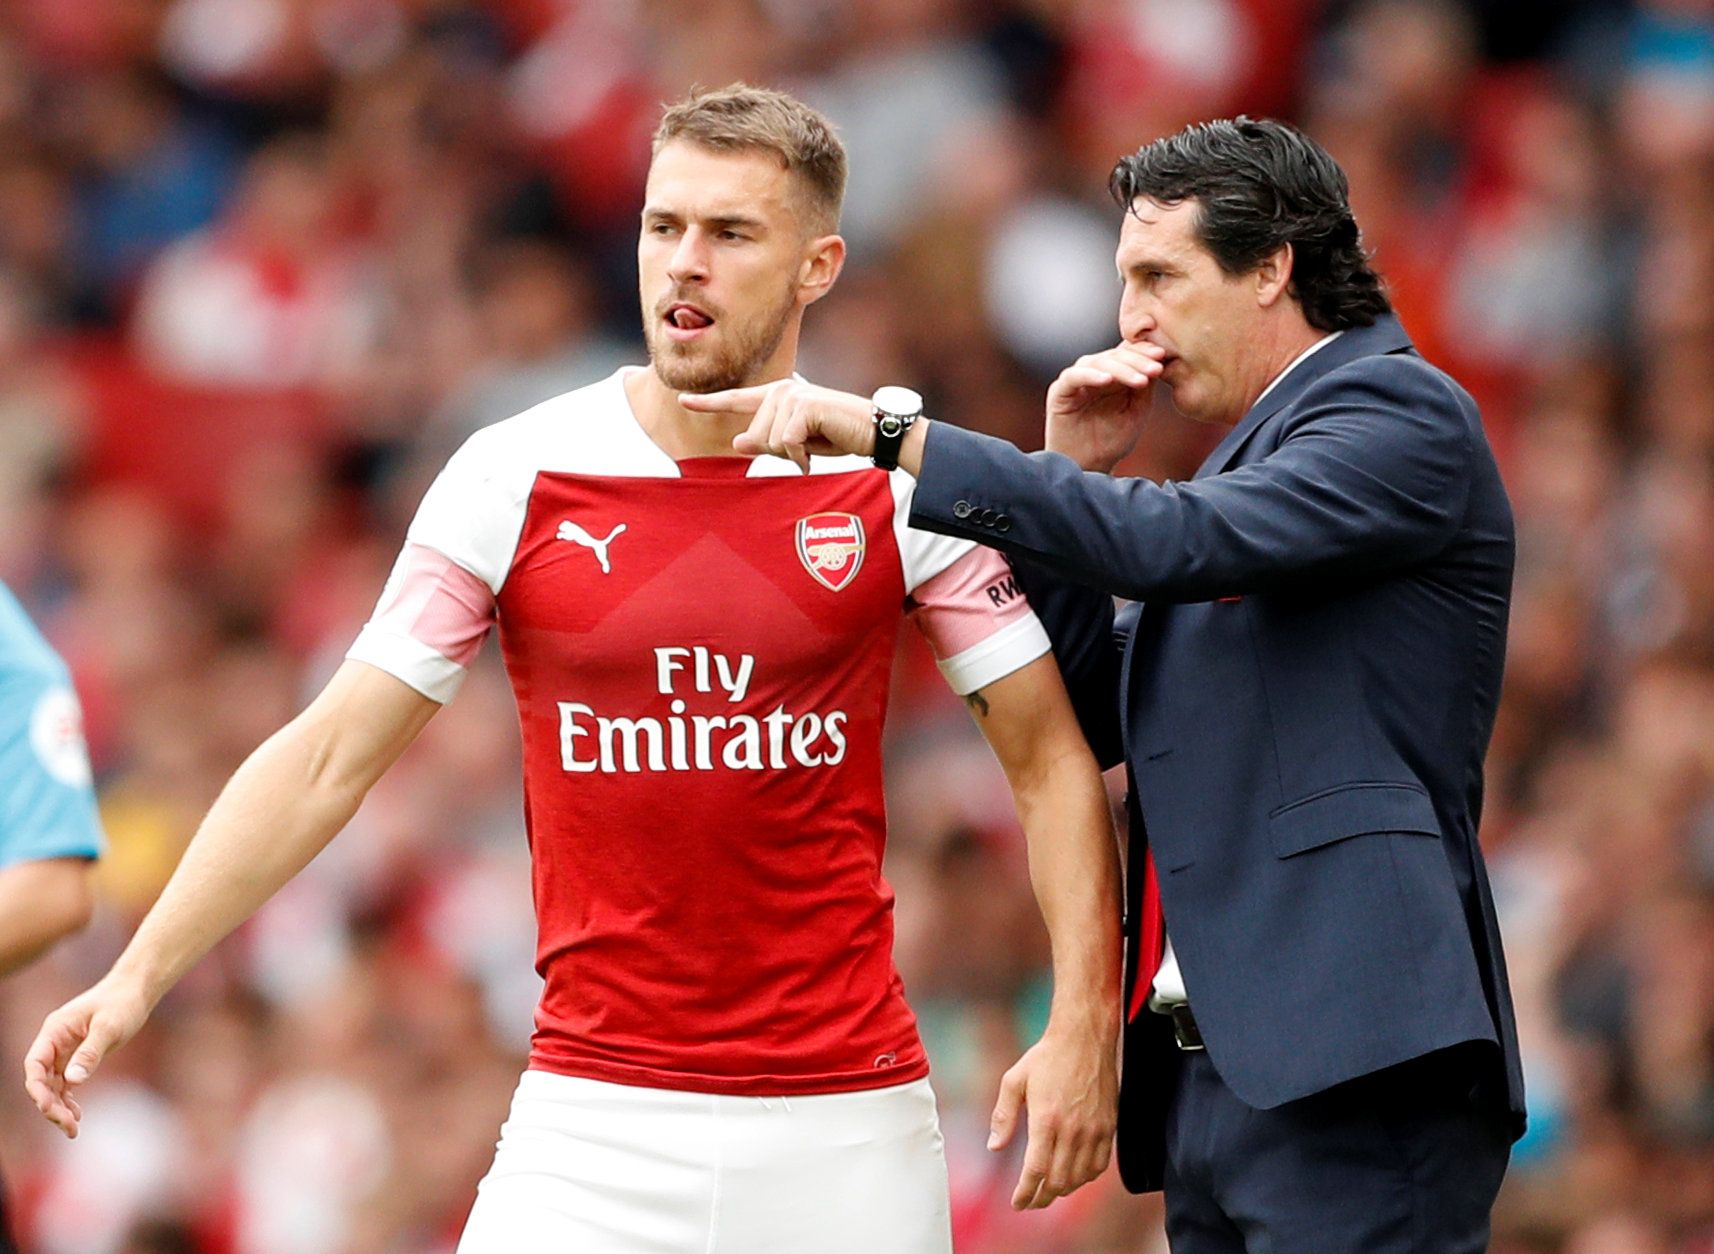 Soccer Football - Premier League - Arsenal v Manchester City - Emirates Stadium, London, Britain - August 12, 2018   Arsenal manager Unai Emery and Arsenal's Aaron Ramsey   Action Images via Reuters/John Sibley    EDITORIAL USE ONLY. No use with unauthorized audio, video, data, fixture lists, club/league logos or 